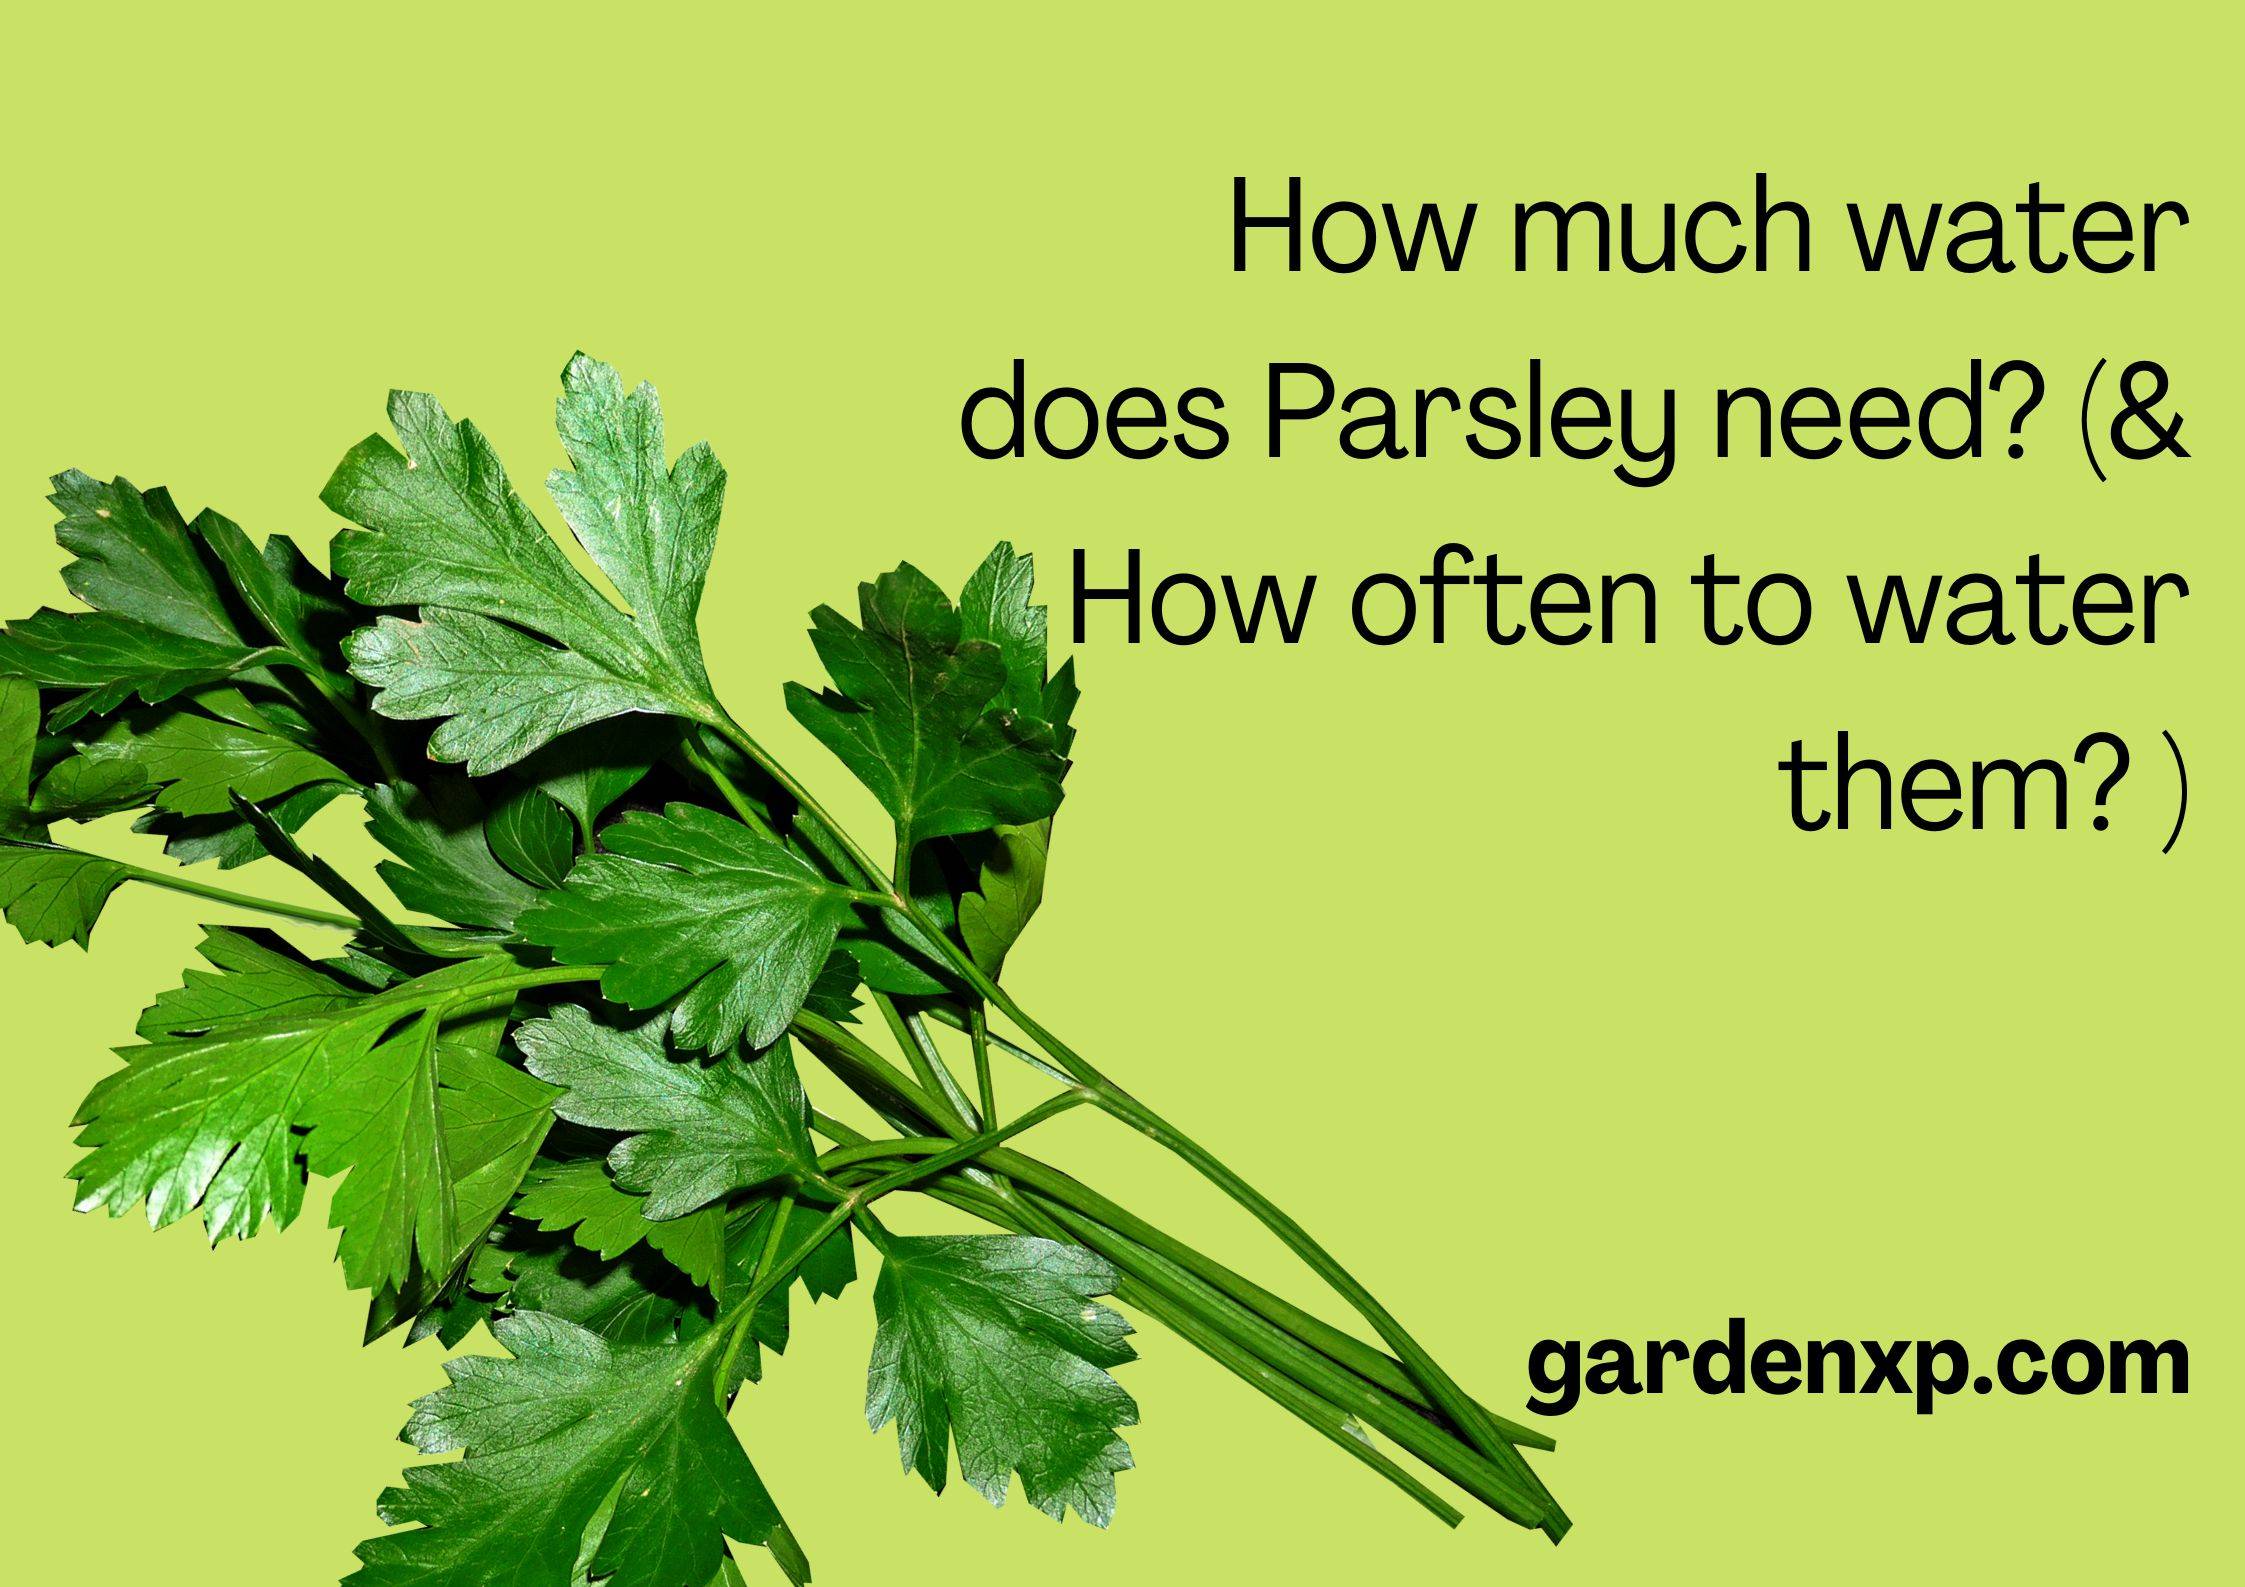 How much water does Parsley need? (& How often to water them? )